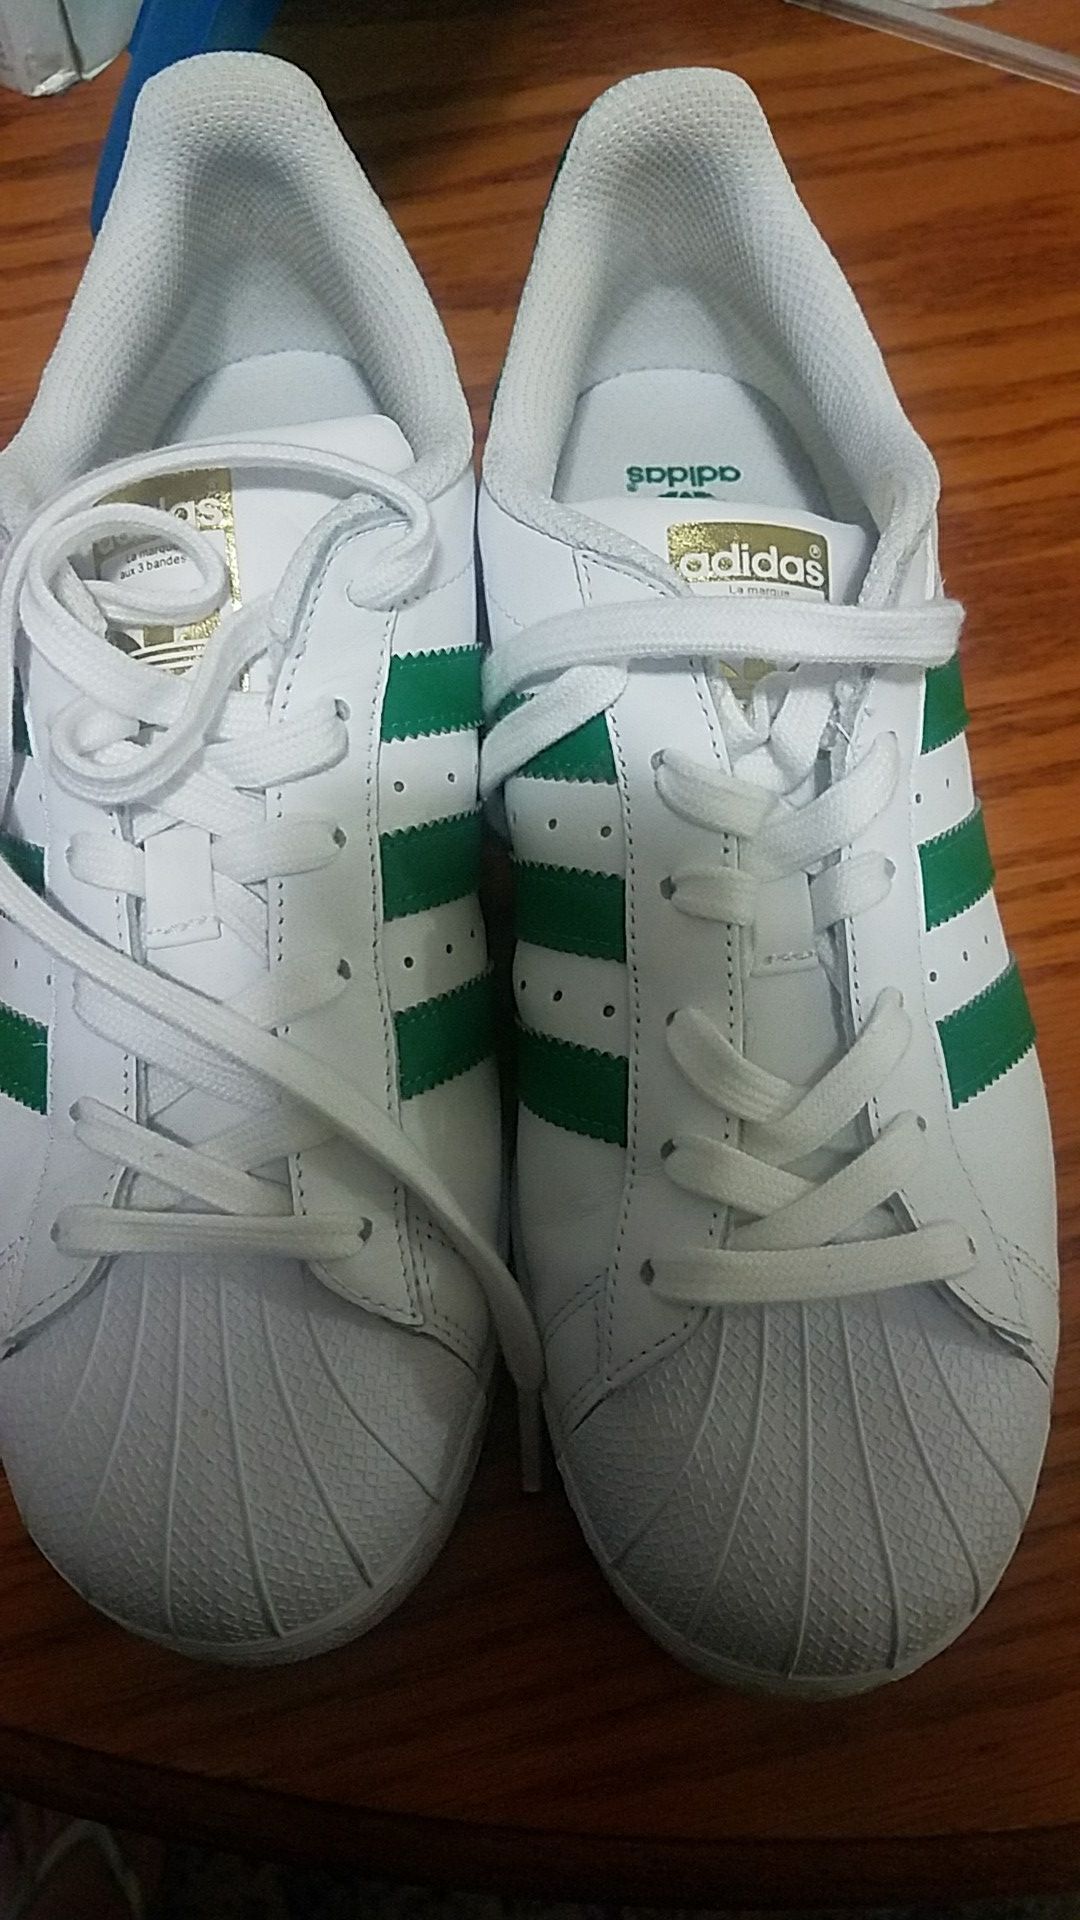 Tennis shoes adidas superstar size 7